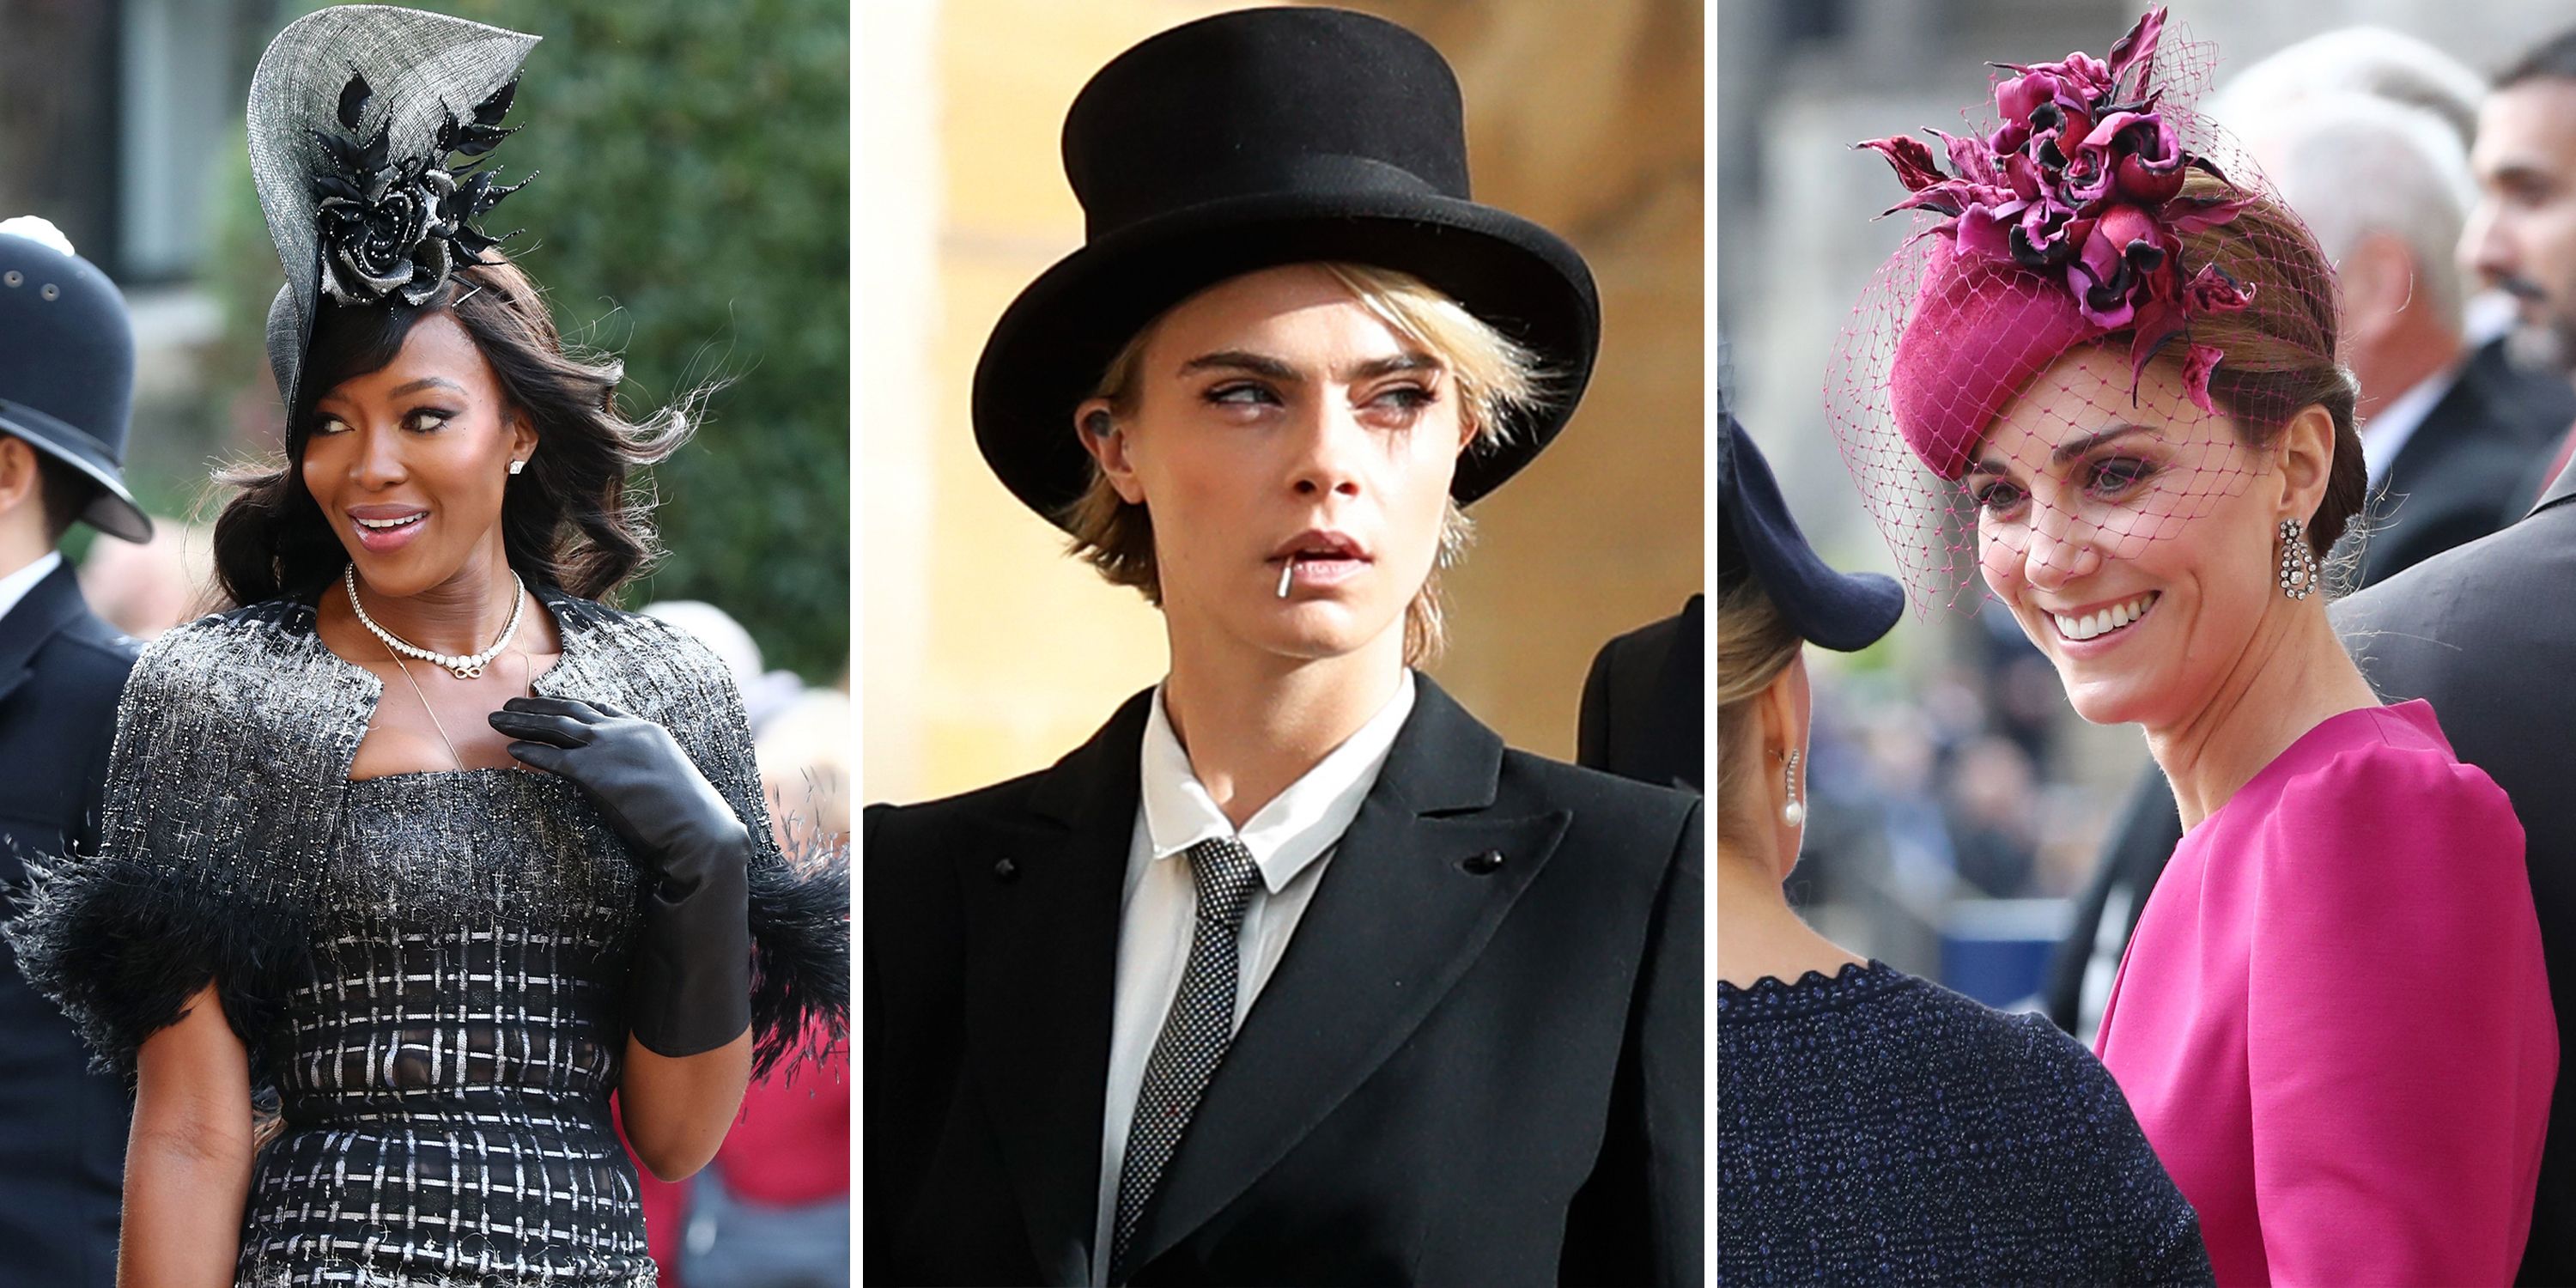 The Best Royal Wedding Hats and Fascinators From Princess Eugenie's Wedding